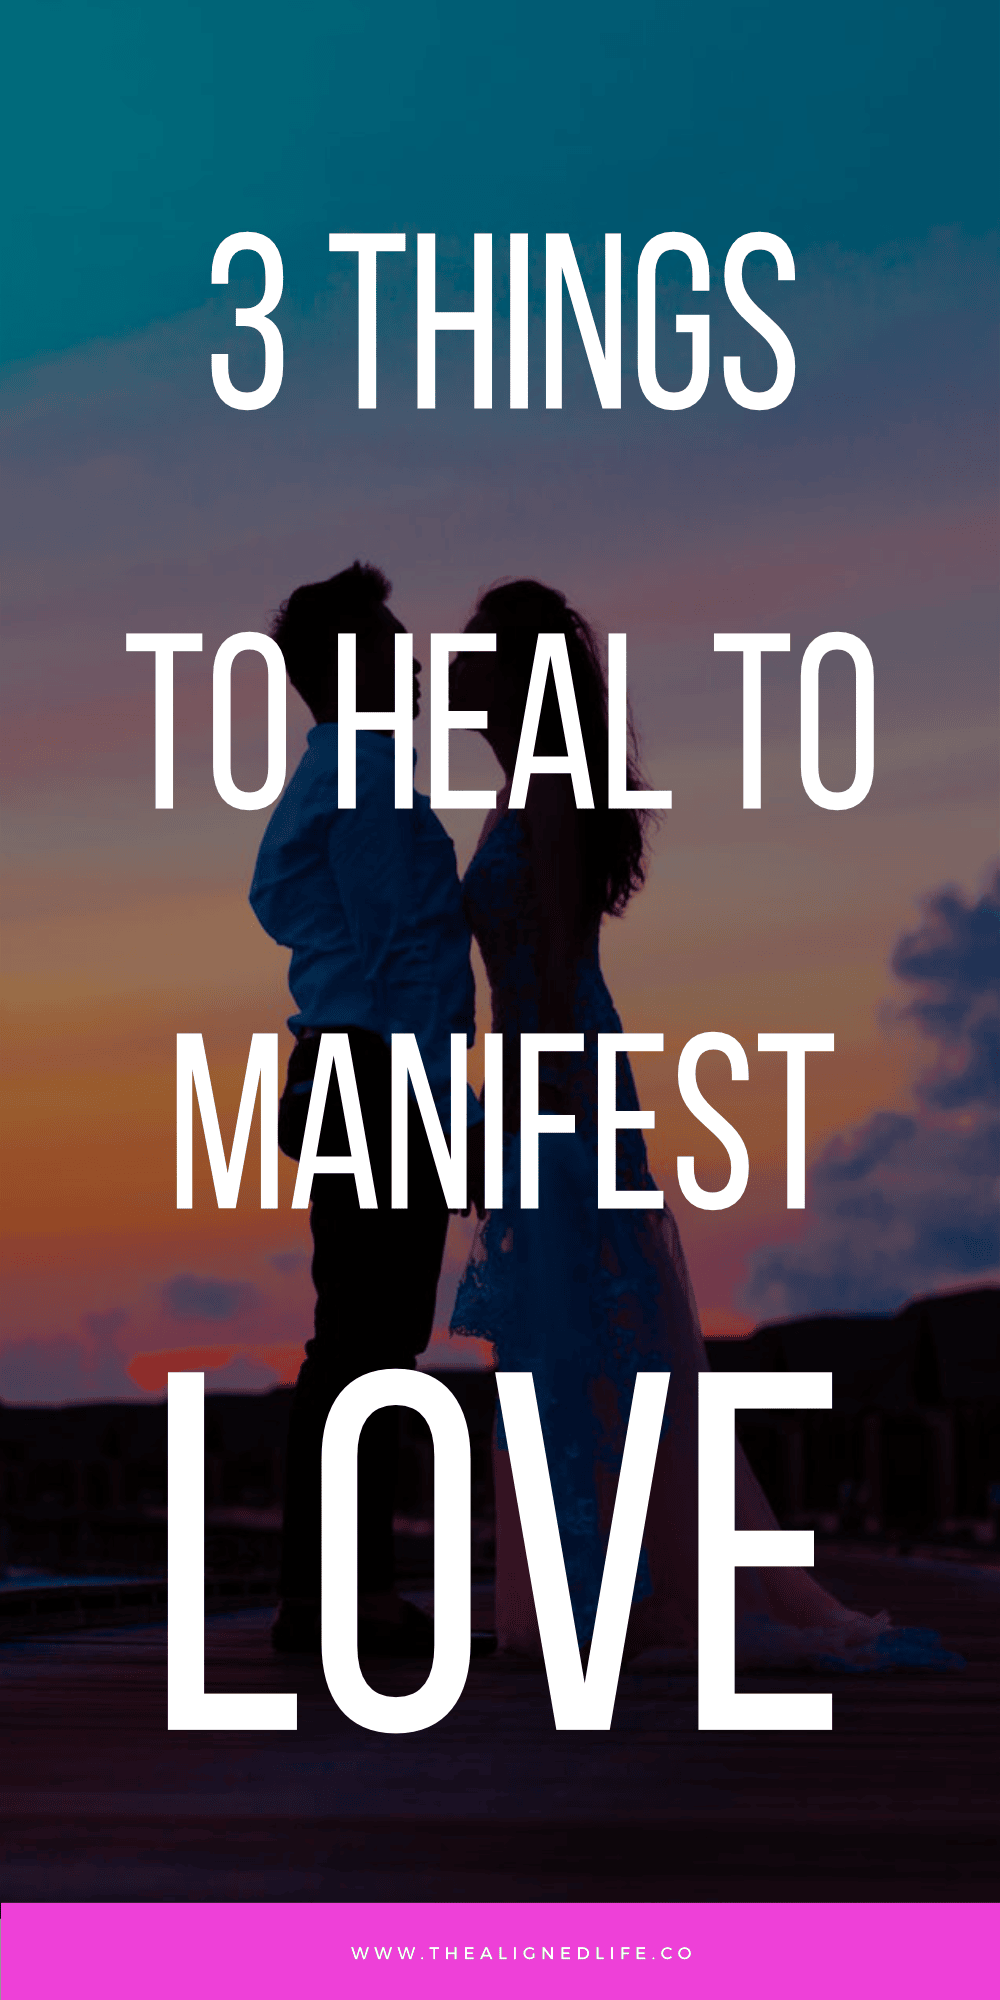 3 Things To Heal To Manifest Love